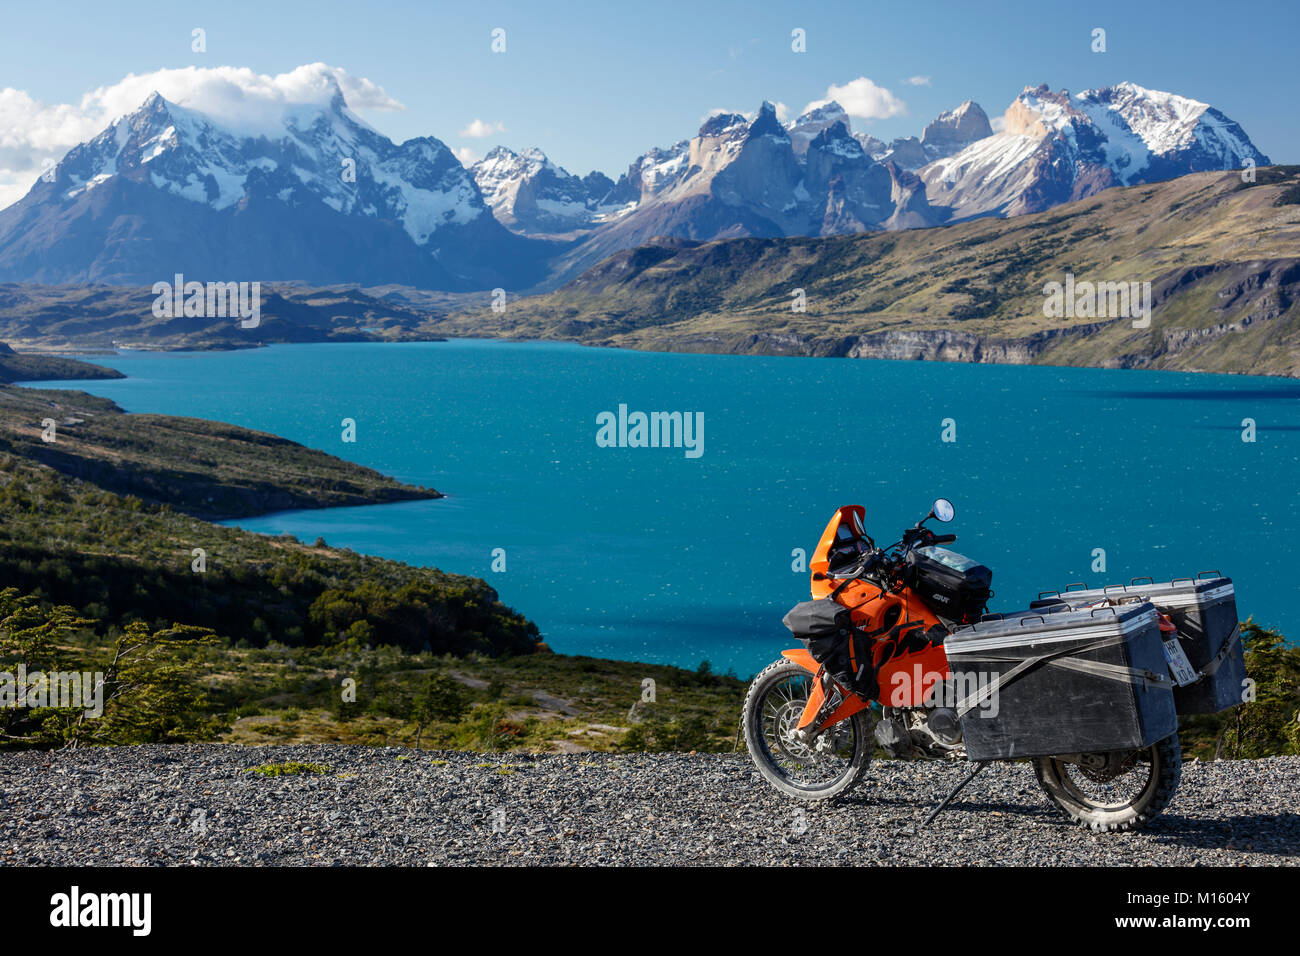 A heavily packed motorcycle on a gravel road behind the Lago del Torro and the mountain group Cordillera Paine,Torres de Paine, Stock Photo